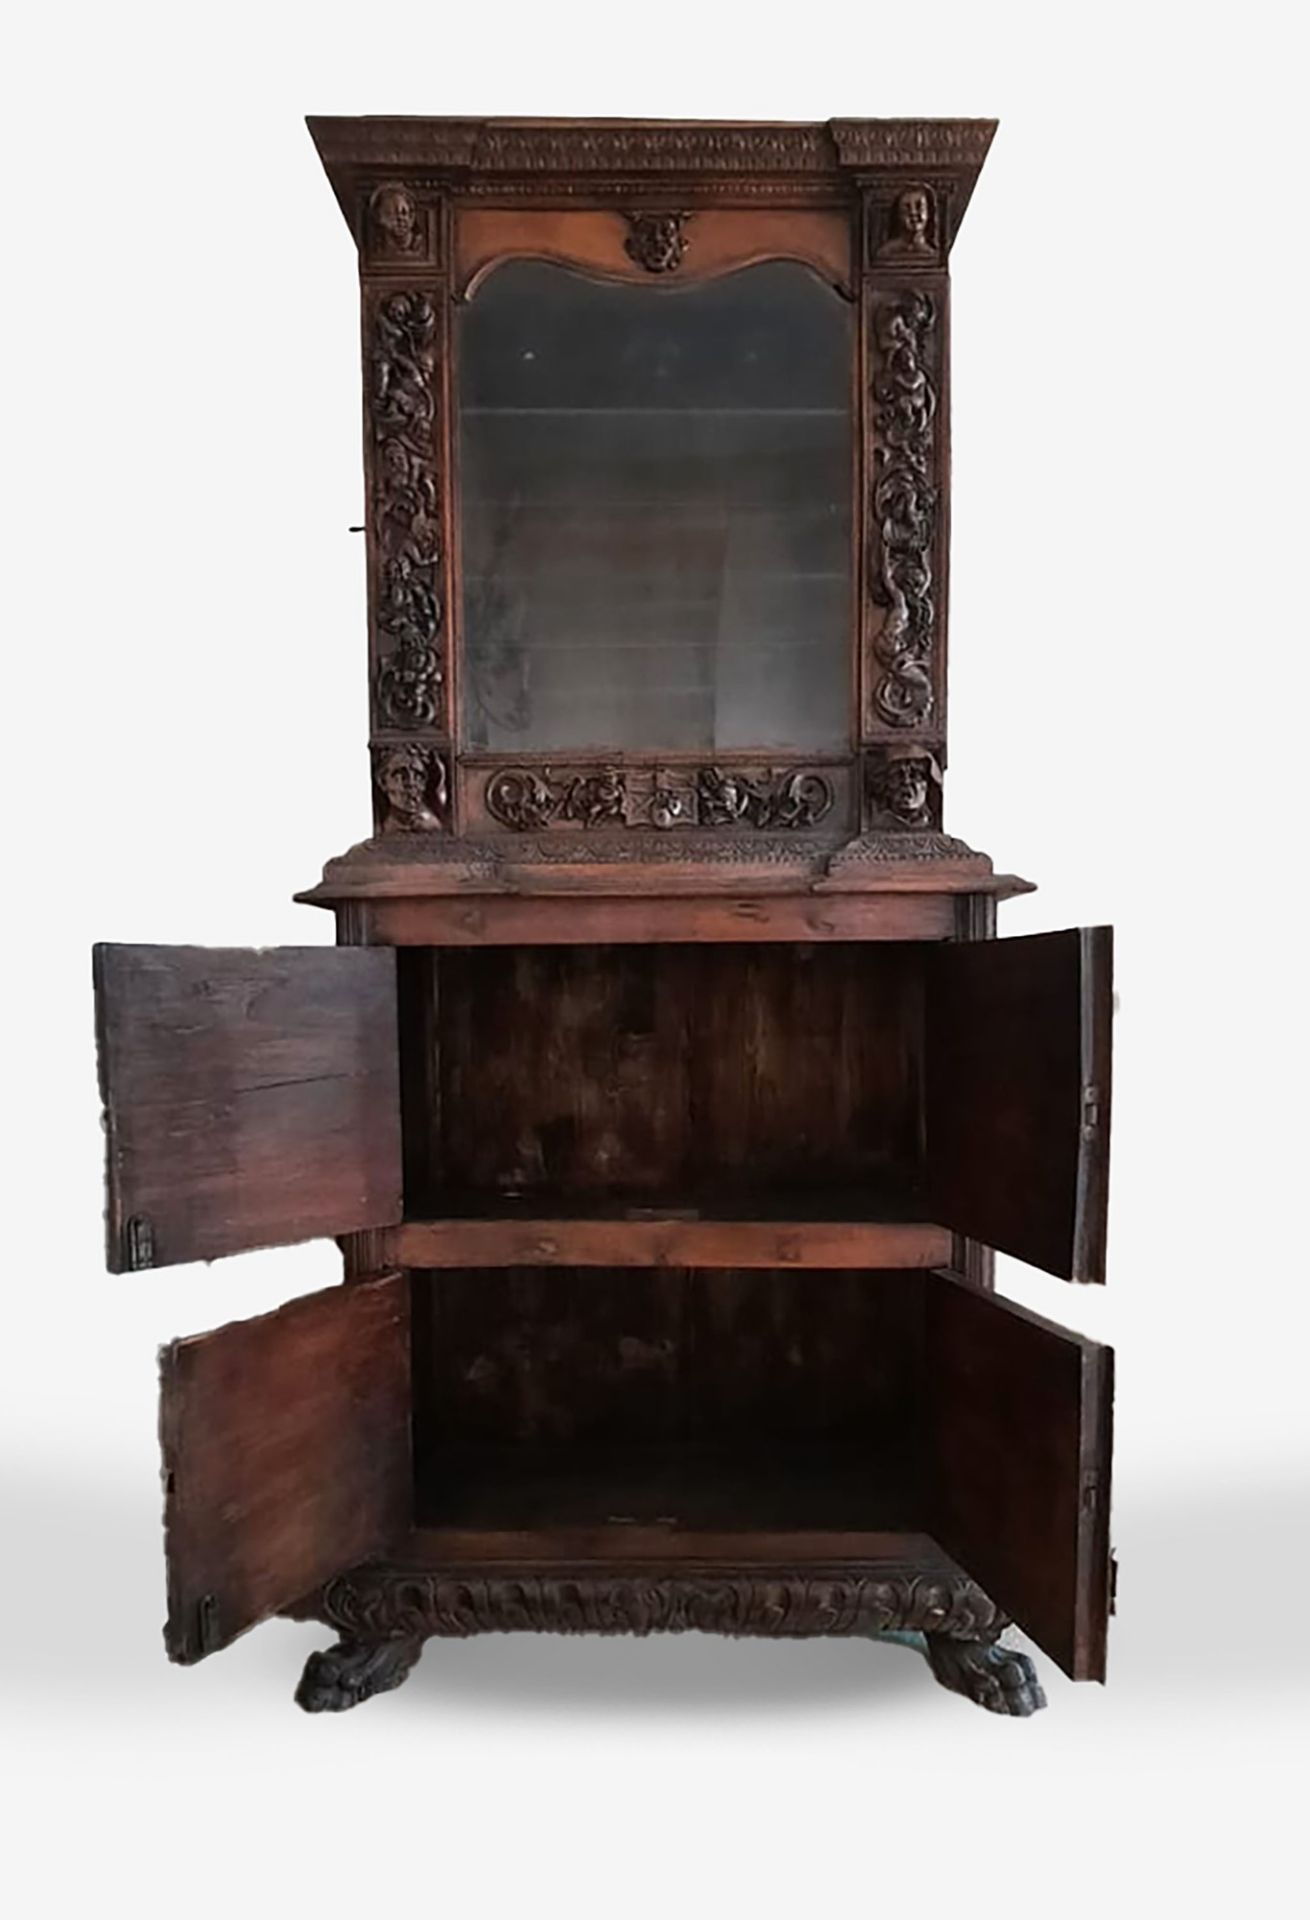 Two-parts cabinet, with Renaissance style display case, 19th century - Image 2 of 2